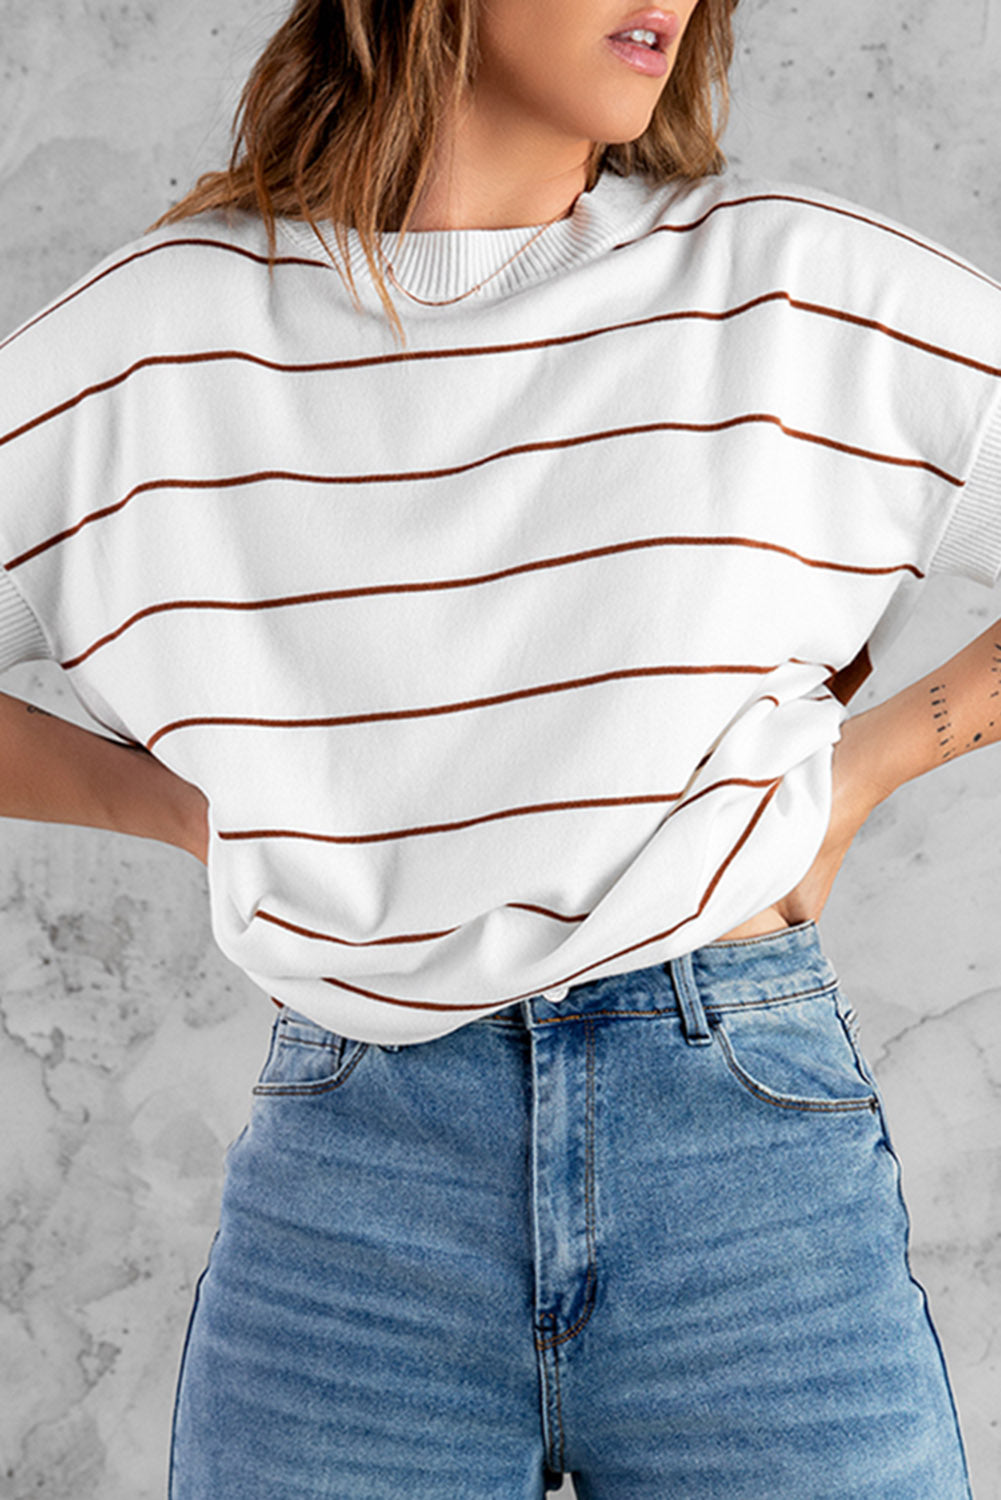 Comfy White Brown Striped Knit Sweater Short Sleeve Top